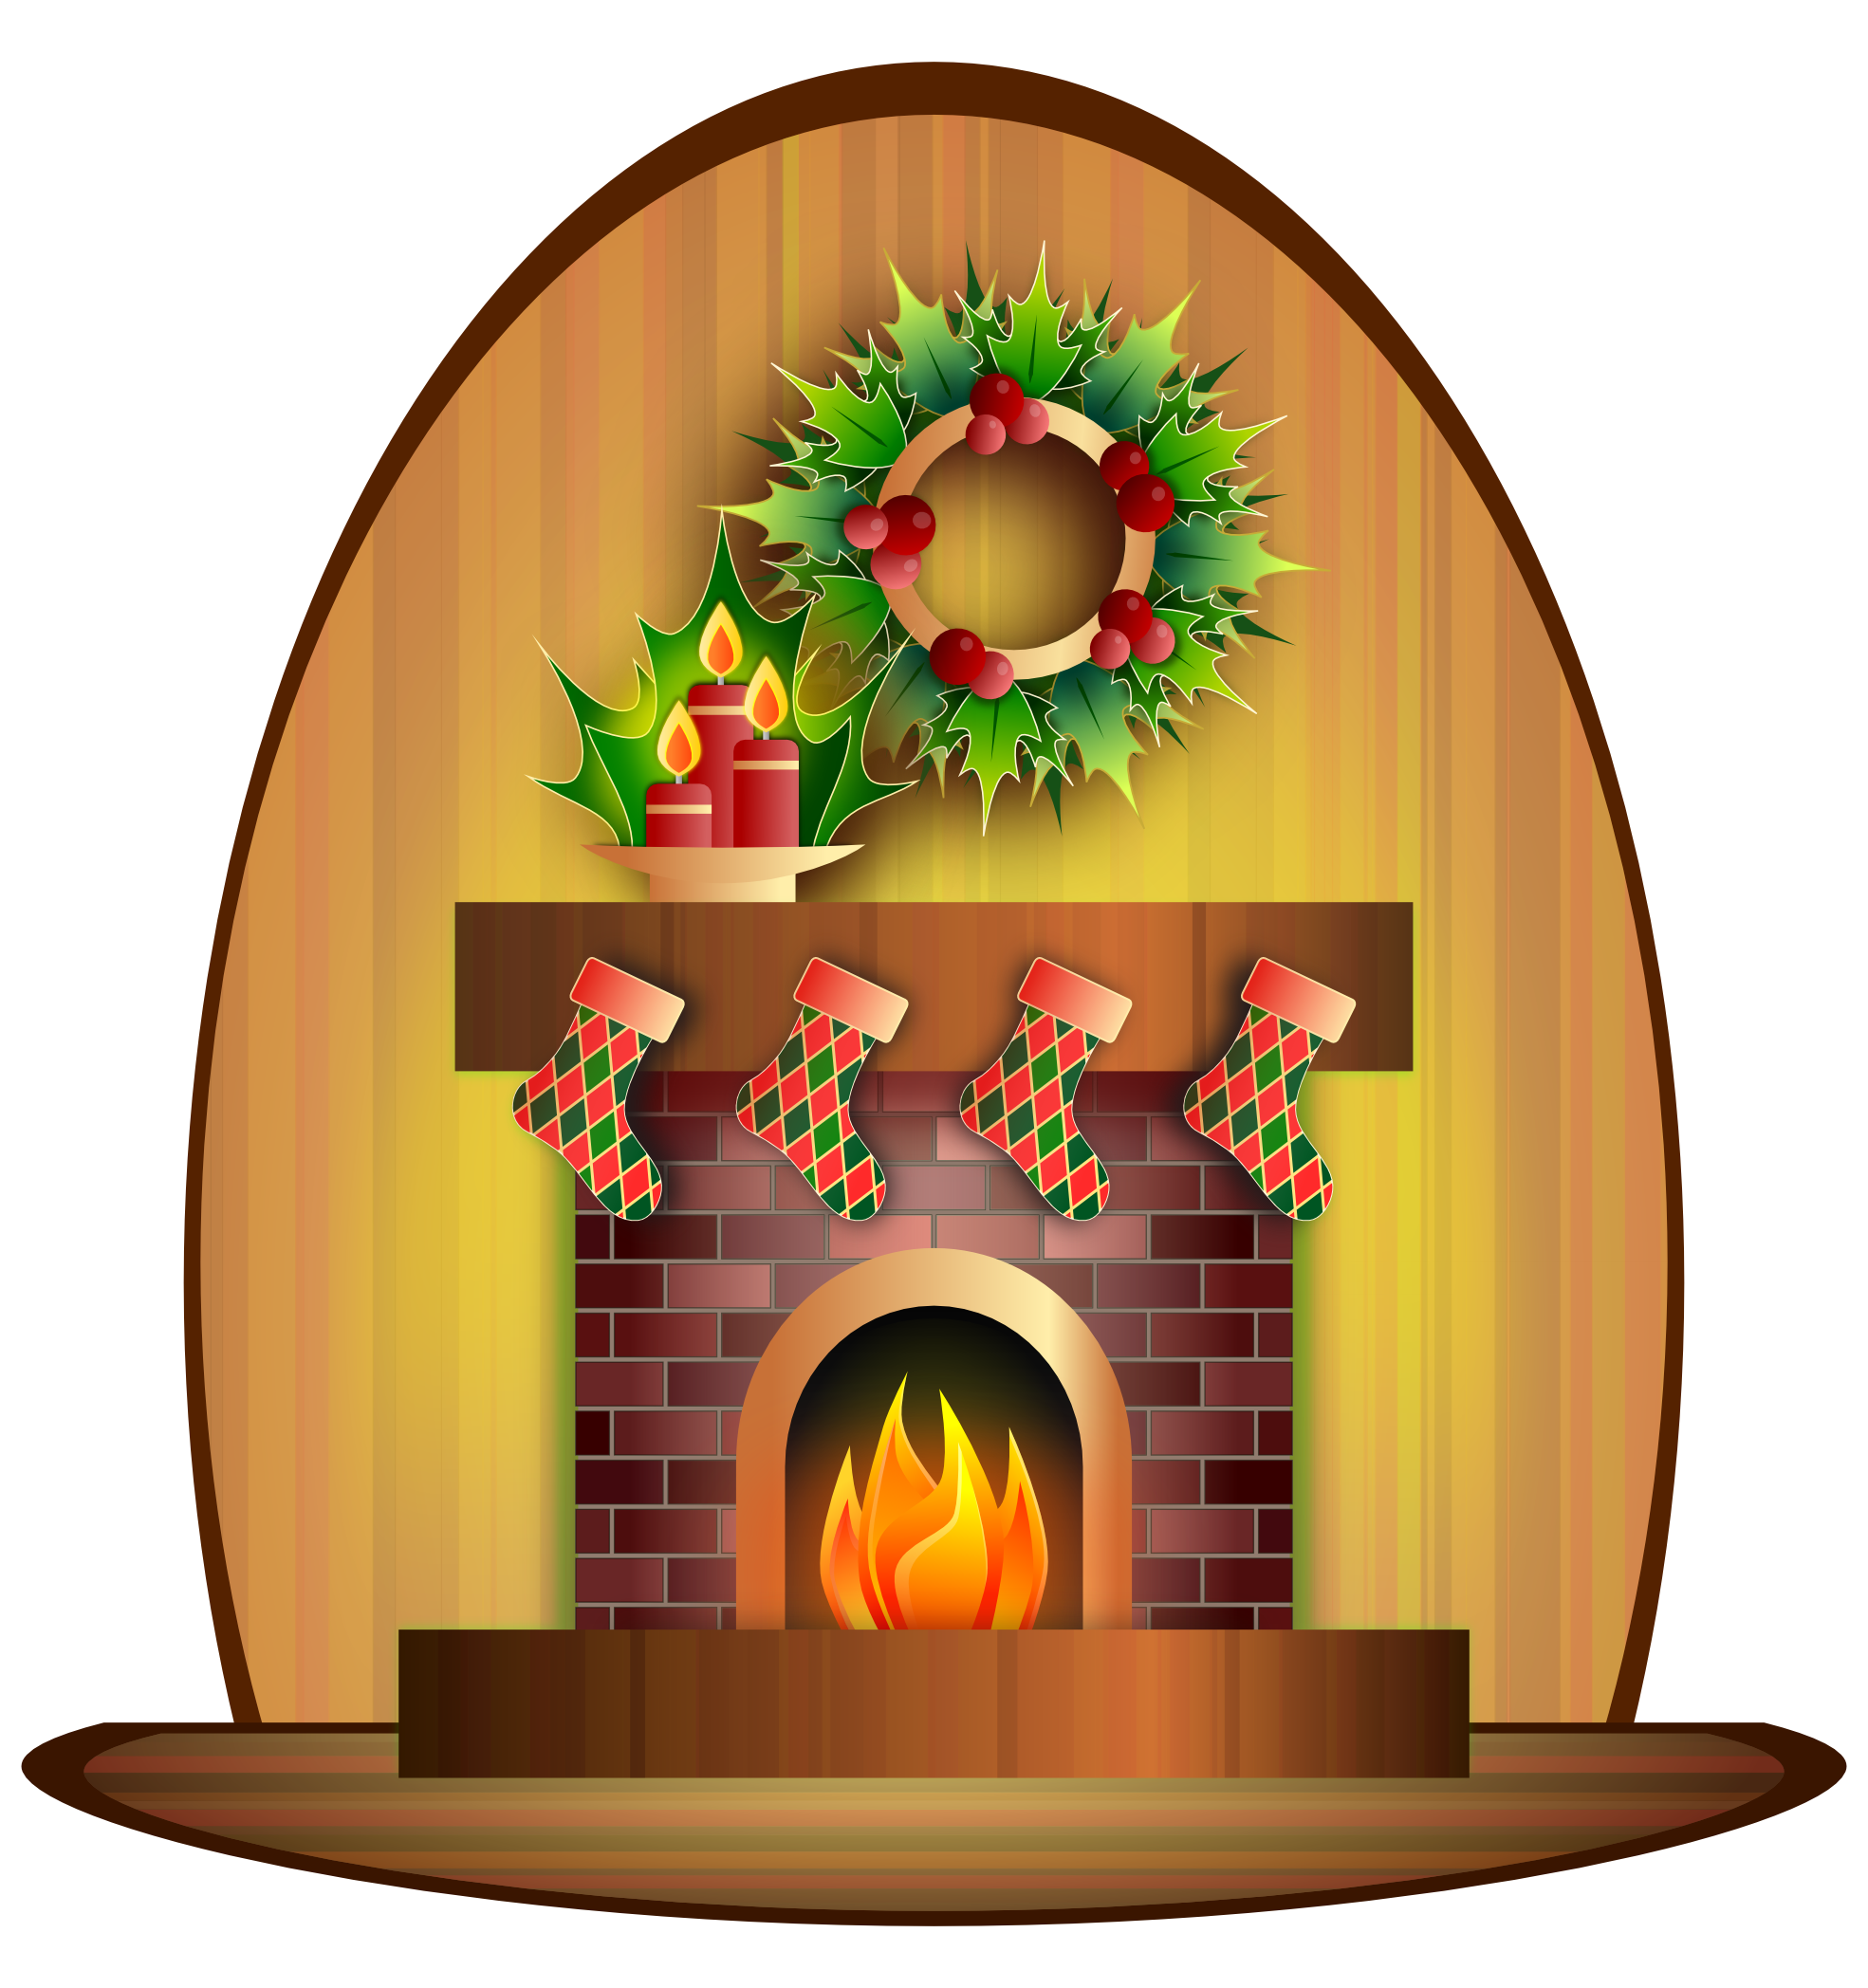 Fireplace 33px Png 2 K  Fireplace 111px Png 16 K  Fireplace 333px Png